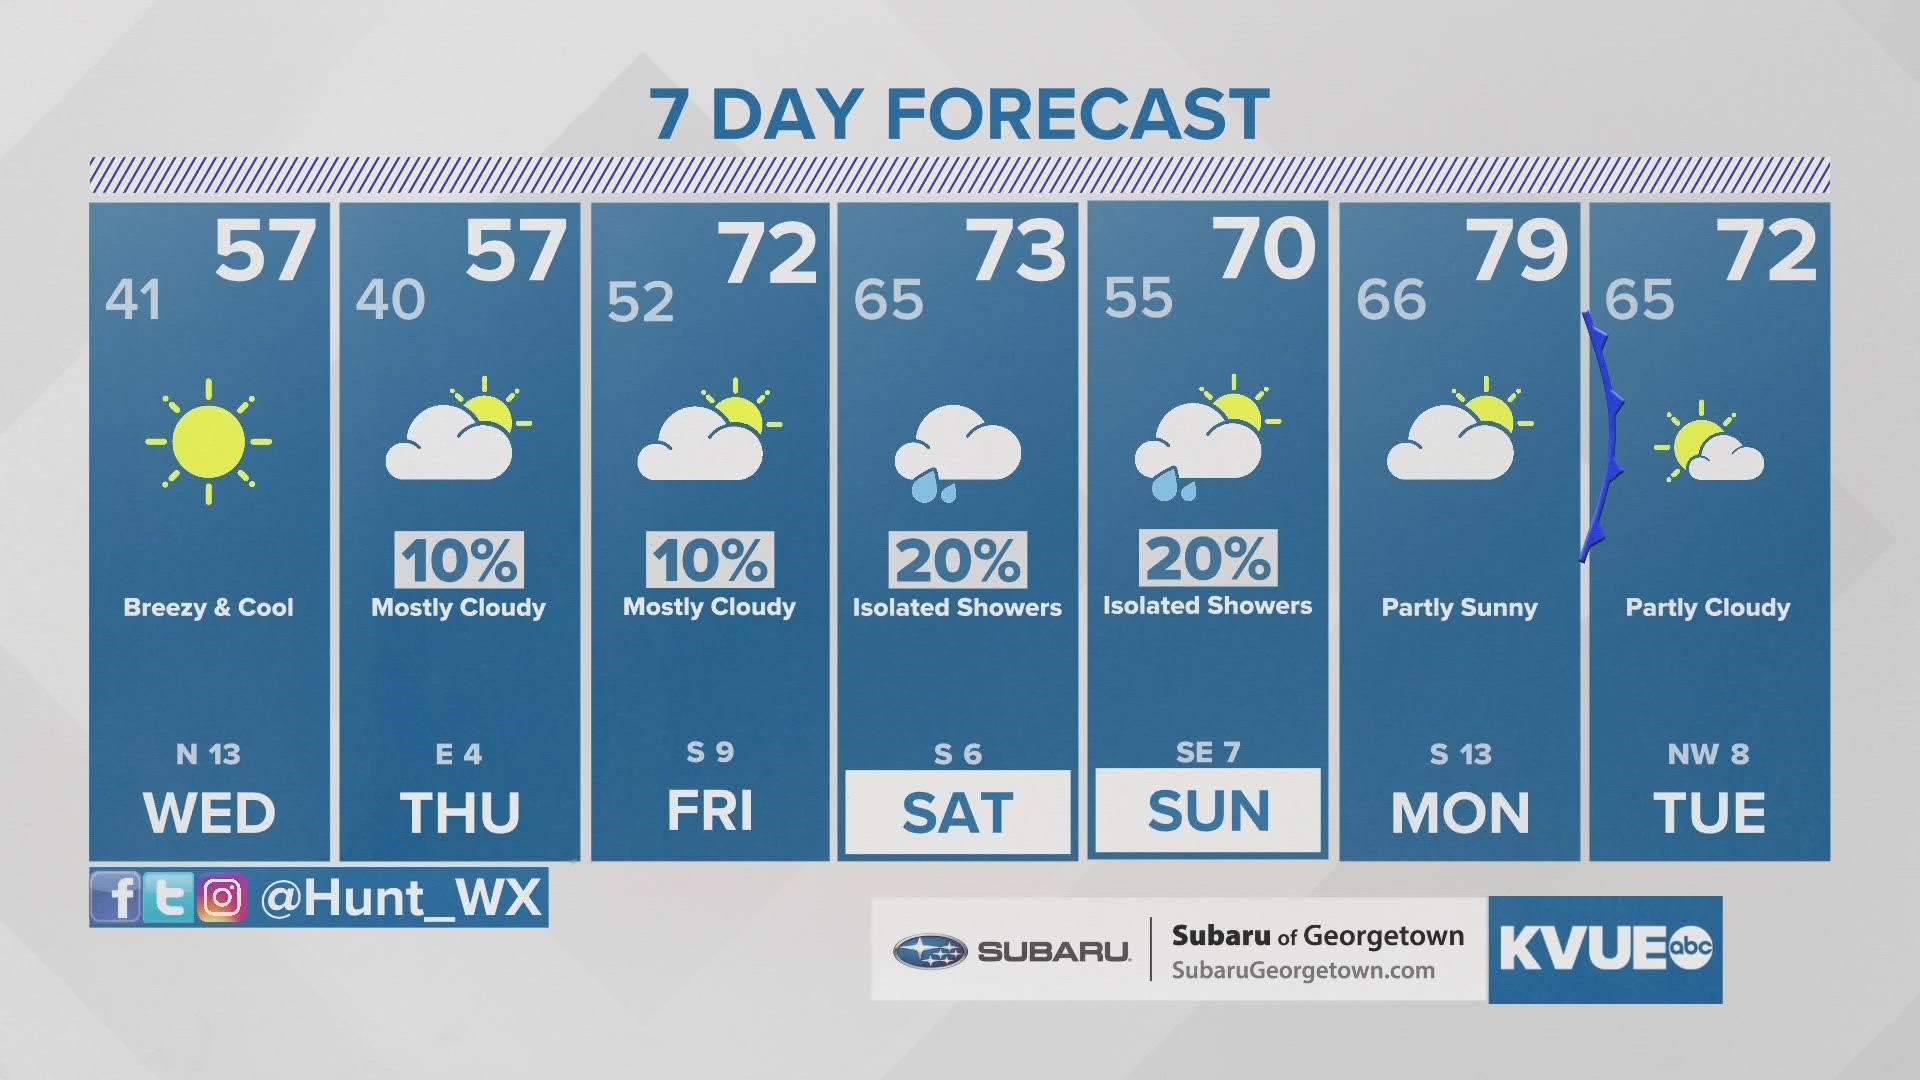 Cooler weather moves in for late week.